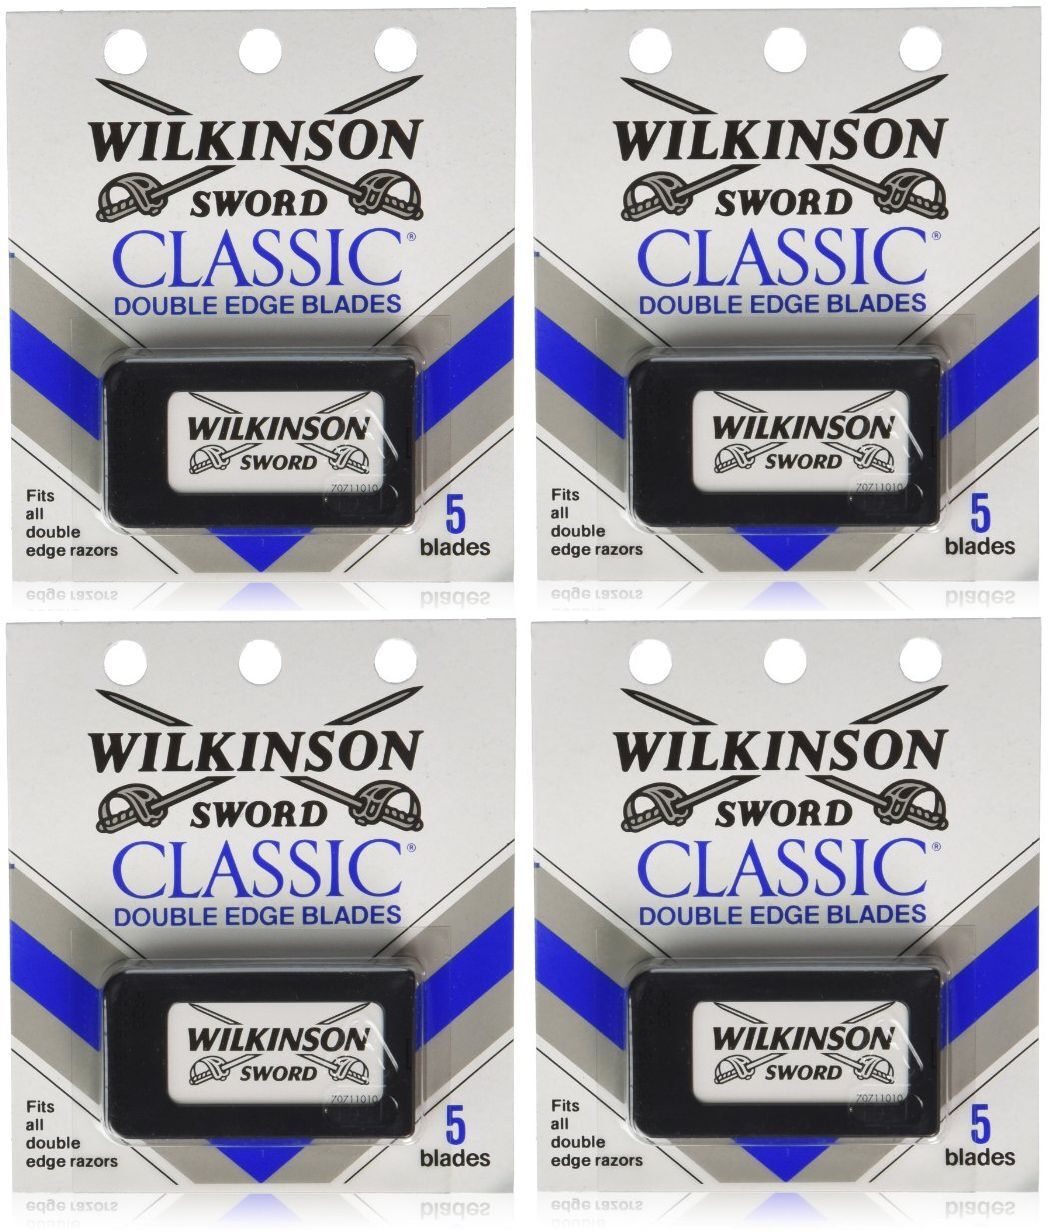 Wilkinson Sword Classic Double Edge Safety Razor Blades - 5 Blades (4 Pack)